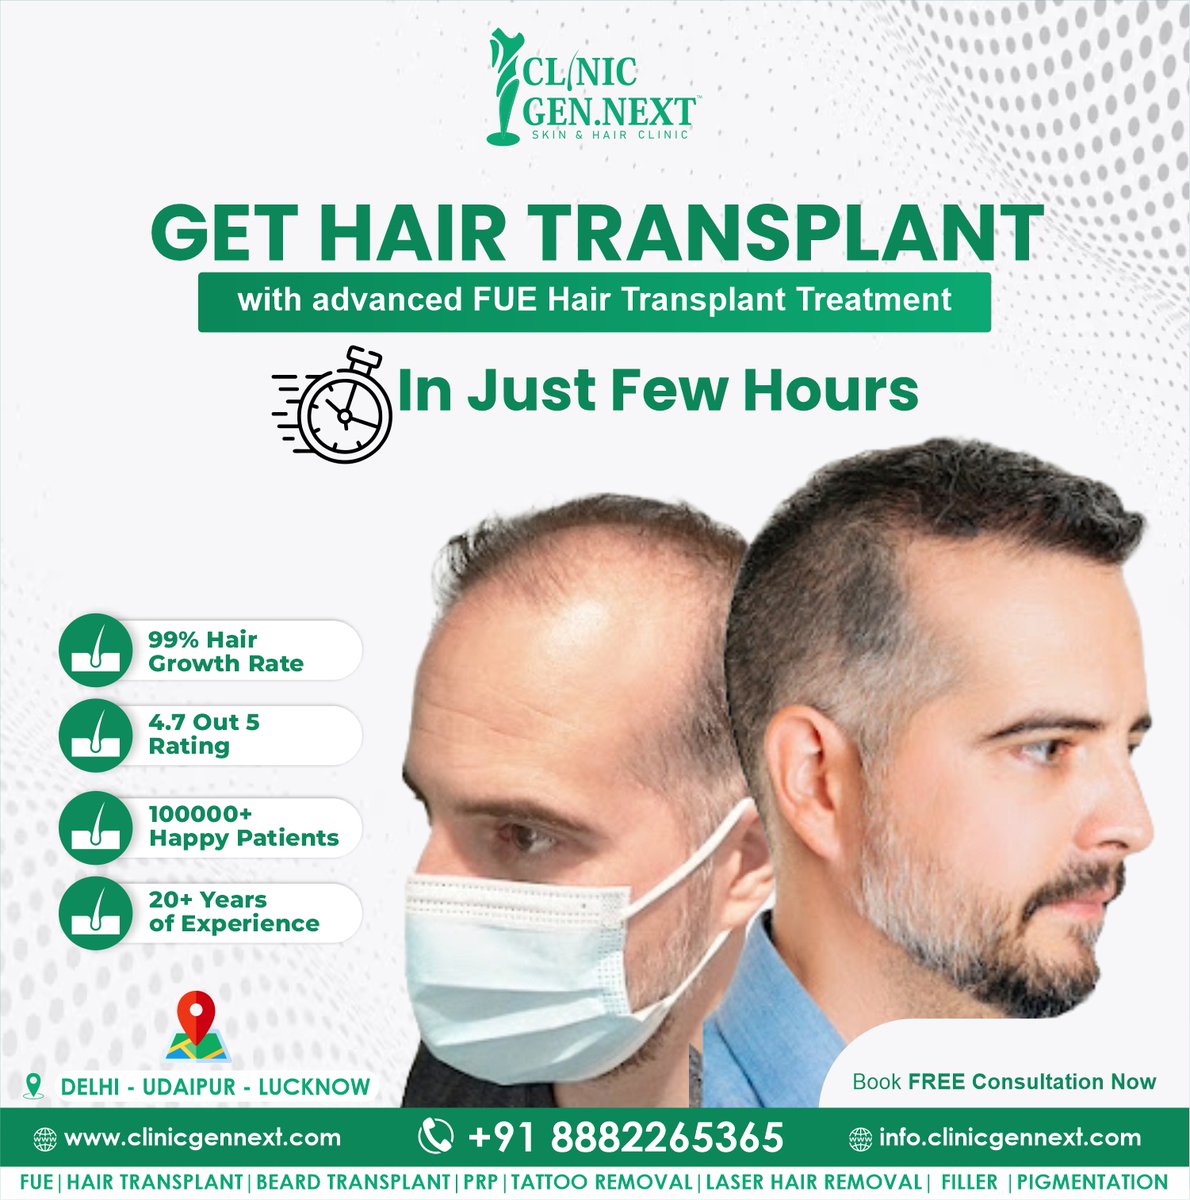 GET HAIR TRANSPLANT
with FUE Hair Transplant Treatment🥳🥳🥳🥳🥳
In Just a Few Hours⌚️

#ClinicGenNext #HairTransplant #SkinTreatment #Wrinkles #Moles #Acne #SkinCare #HairLossSolution #ConfidenceBoost #FUE #FUT #FreeConsultation #HairCare #Dermatology #Skintreatment